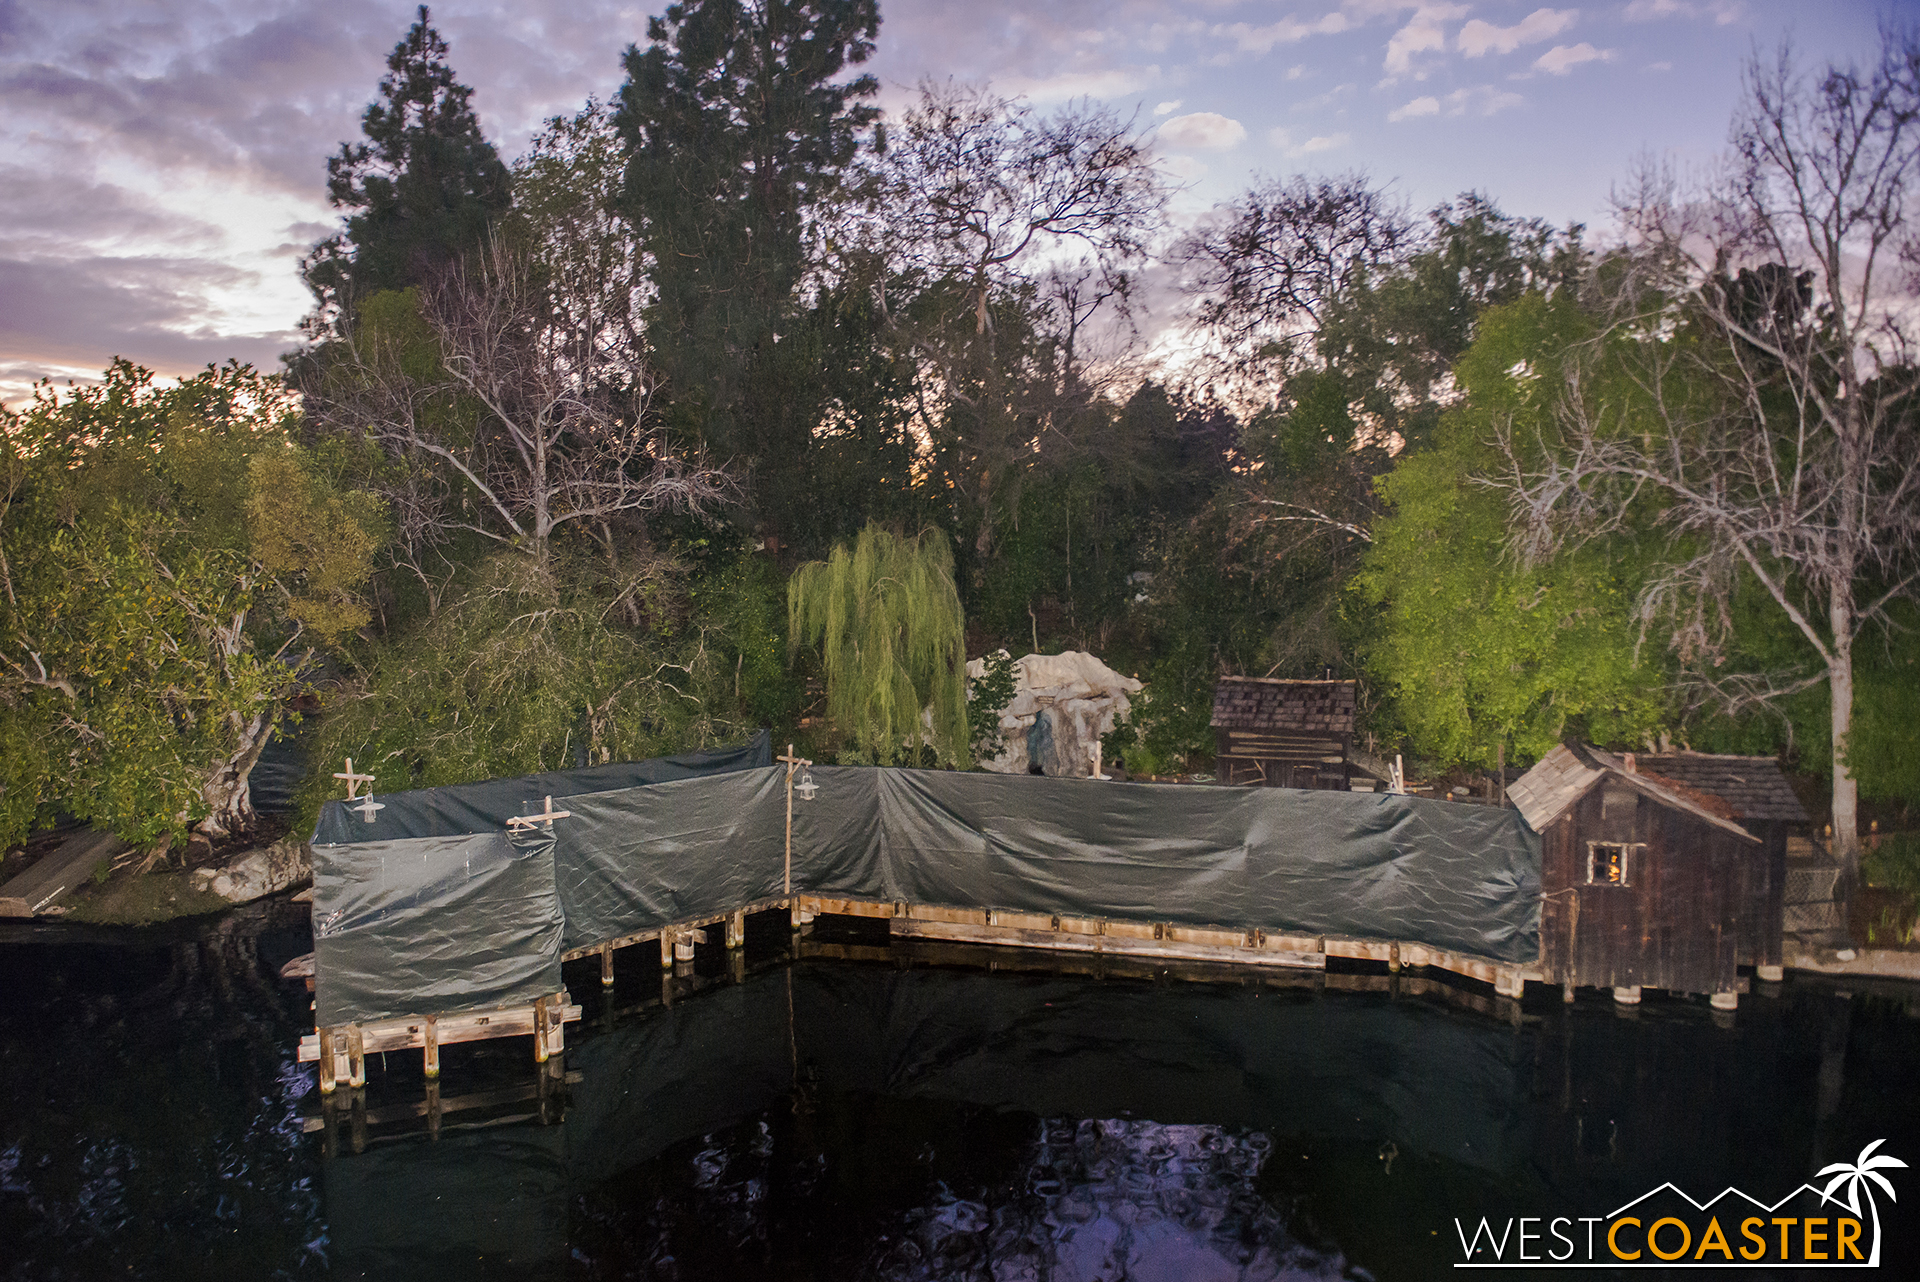  Tarps on the right side conceal the launch point for a new Black Cauldron water float. 